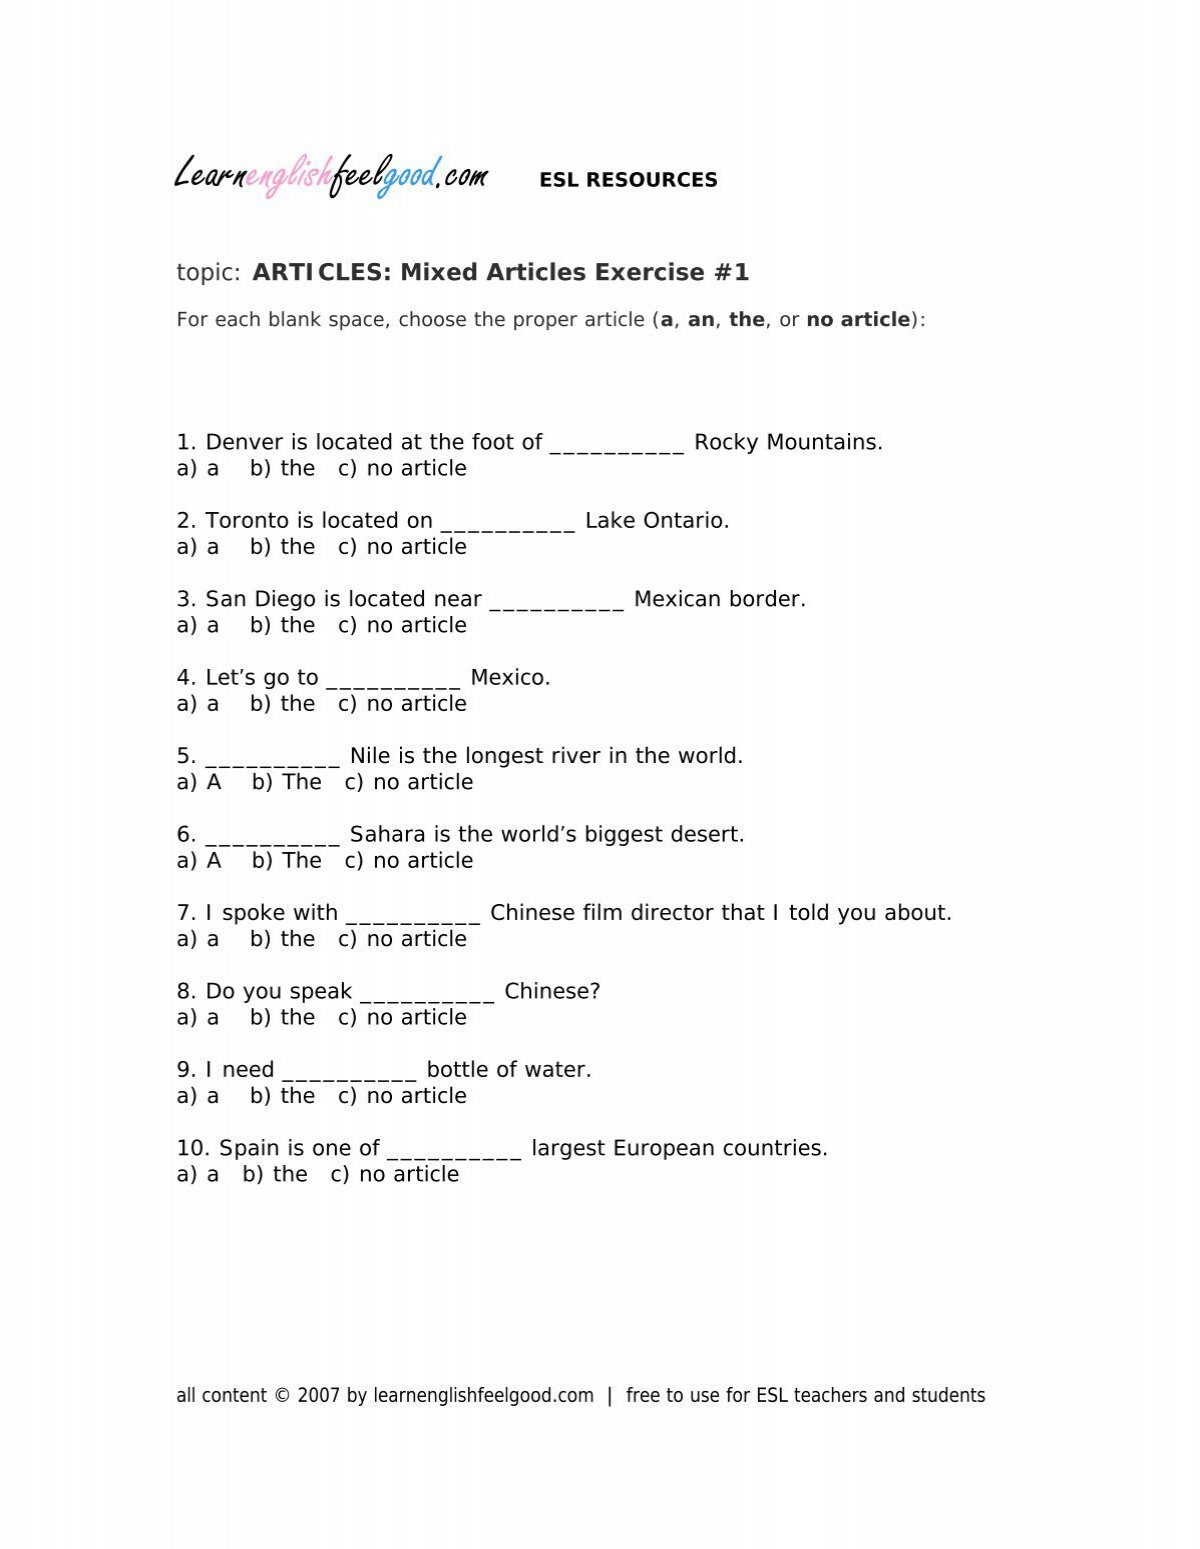 Mixed Articles Exercise #1 - Learn English Feel Good